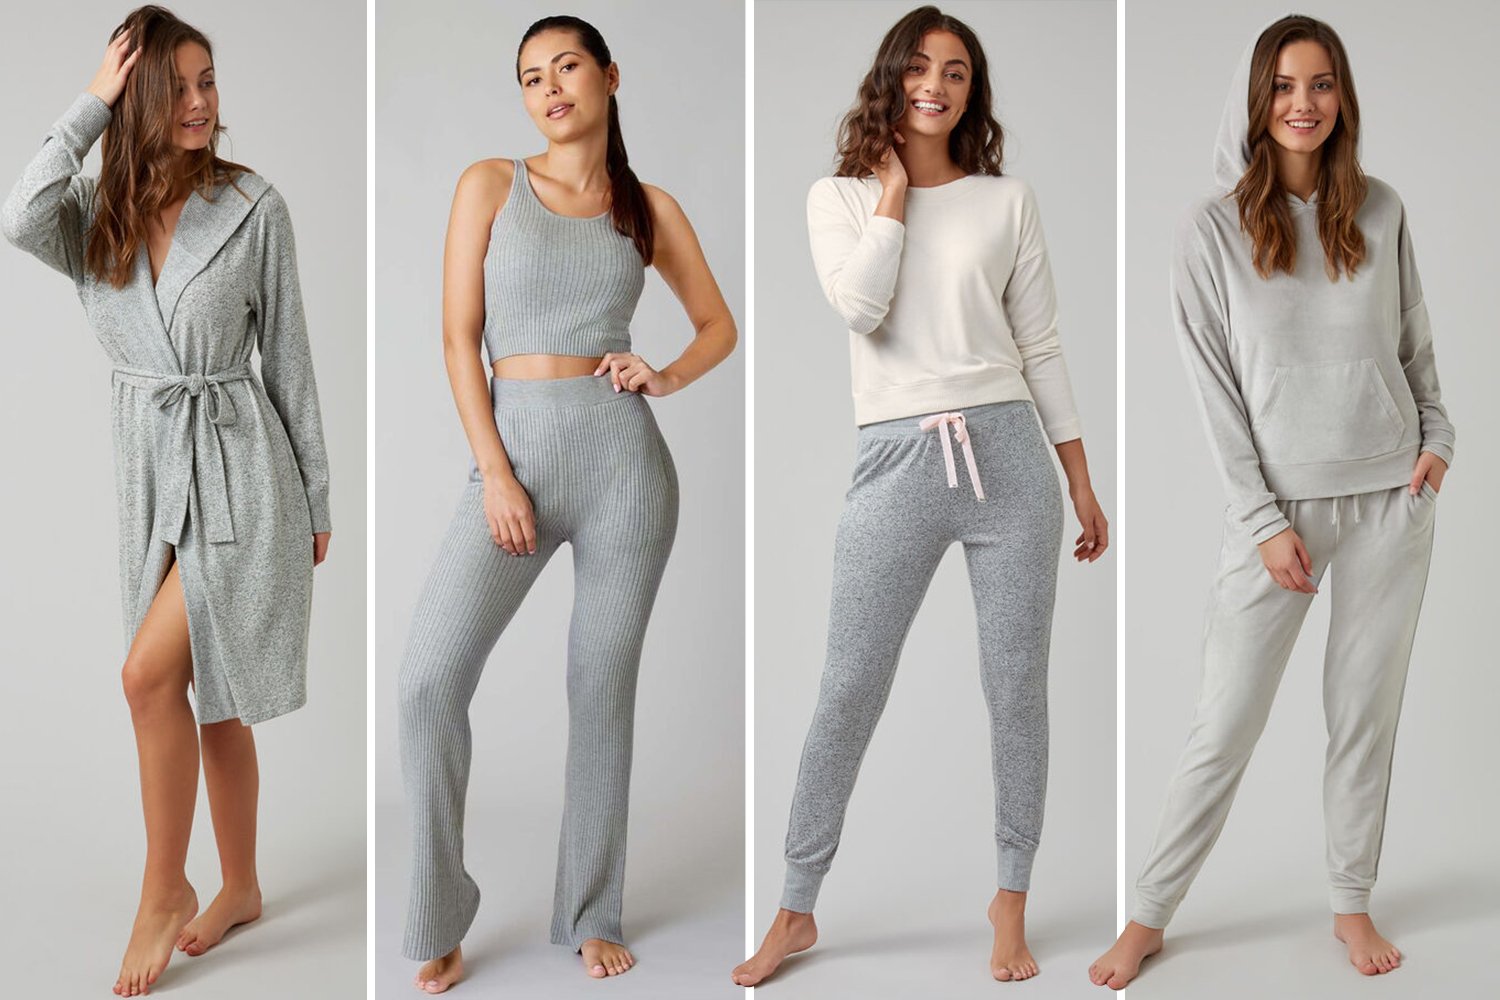 WHY LOUNGEWEAR IS THE NEW FASHION TREND